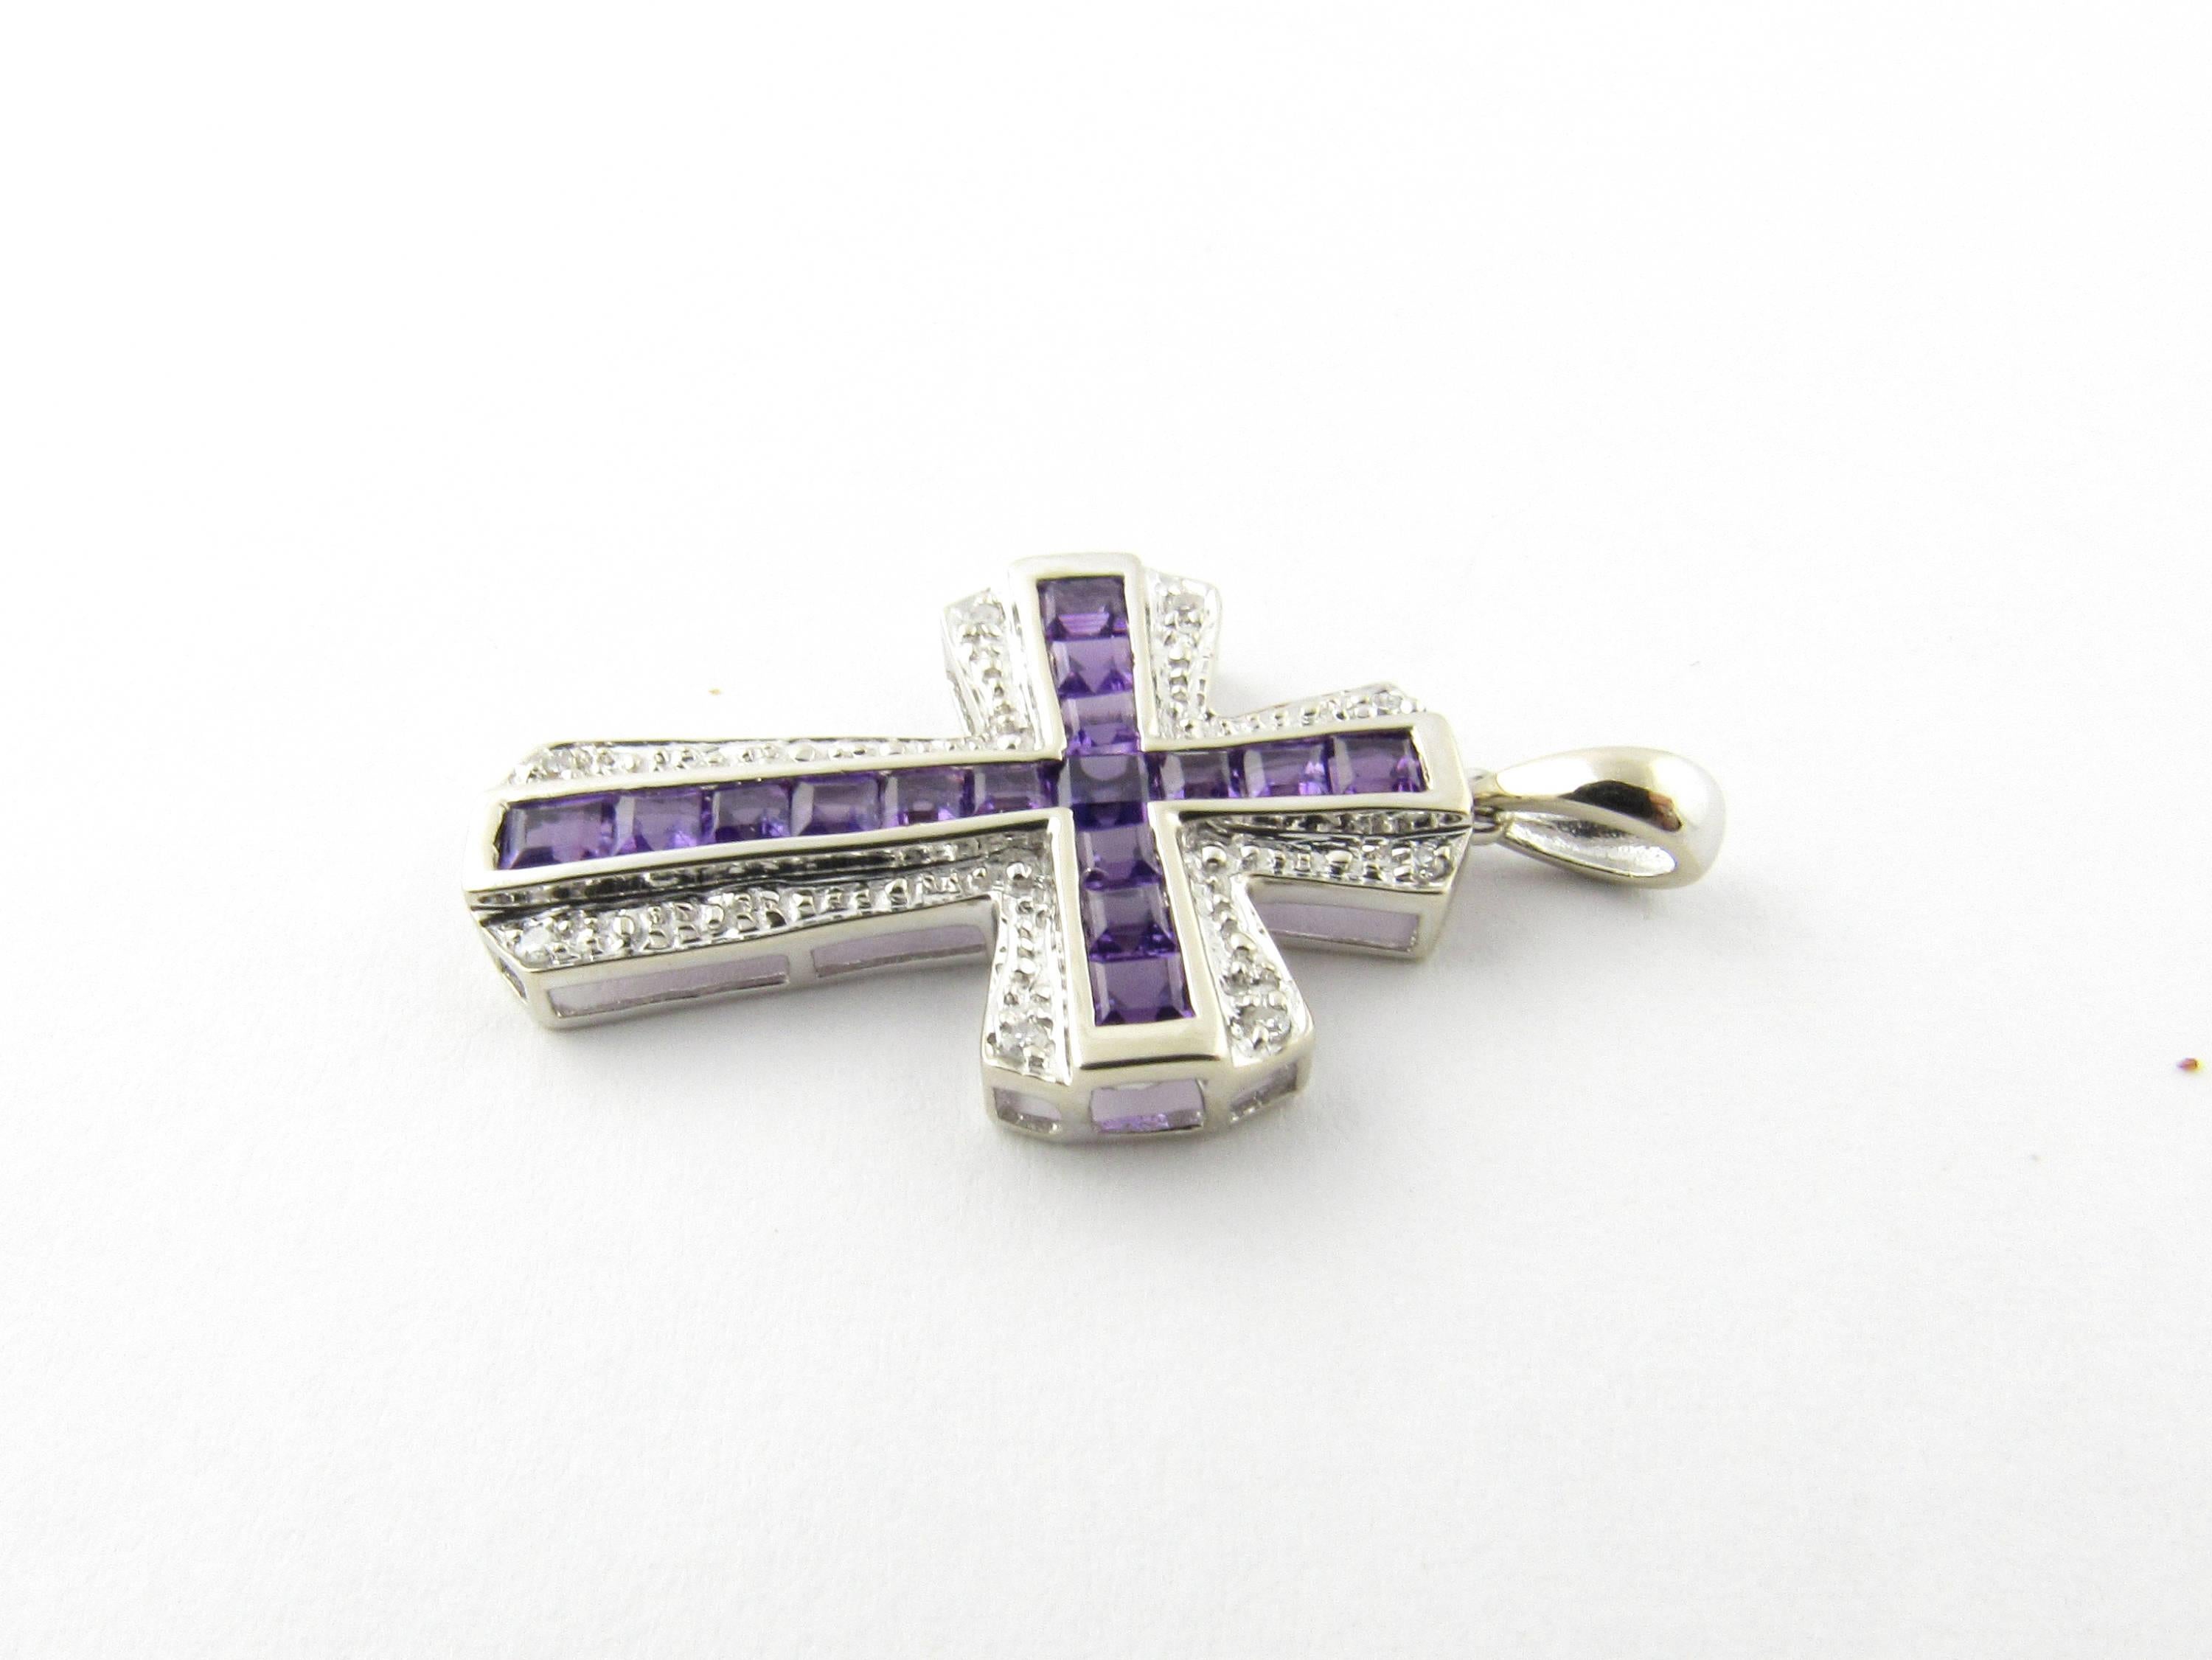 Vintage 14 Karat White Gold Amethyst and Diamond Cross Pendant-

This stunning cross pendant features 16 amethyst stones and eight round single cut diamonds set in classic 14K white gold.

Approximate total diamond weight: .04 ct.

Diamond color: